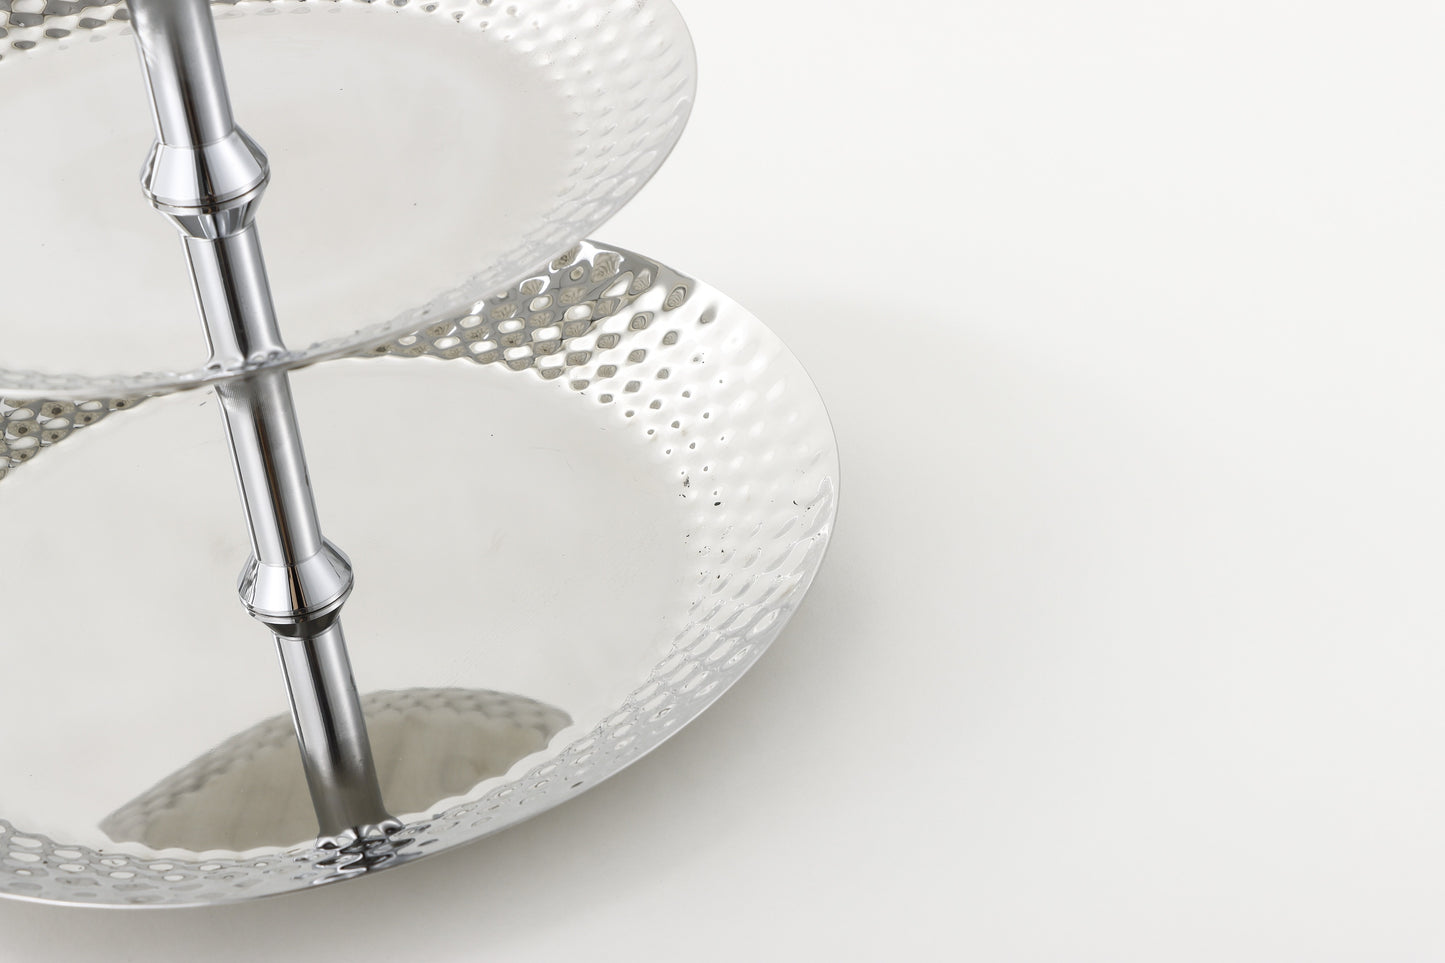 Silver S/S Steel & Aluminum Cake Stand